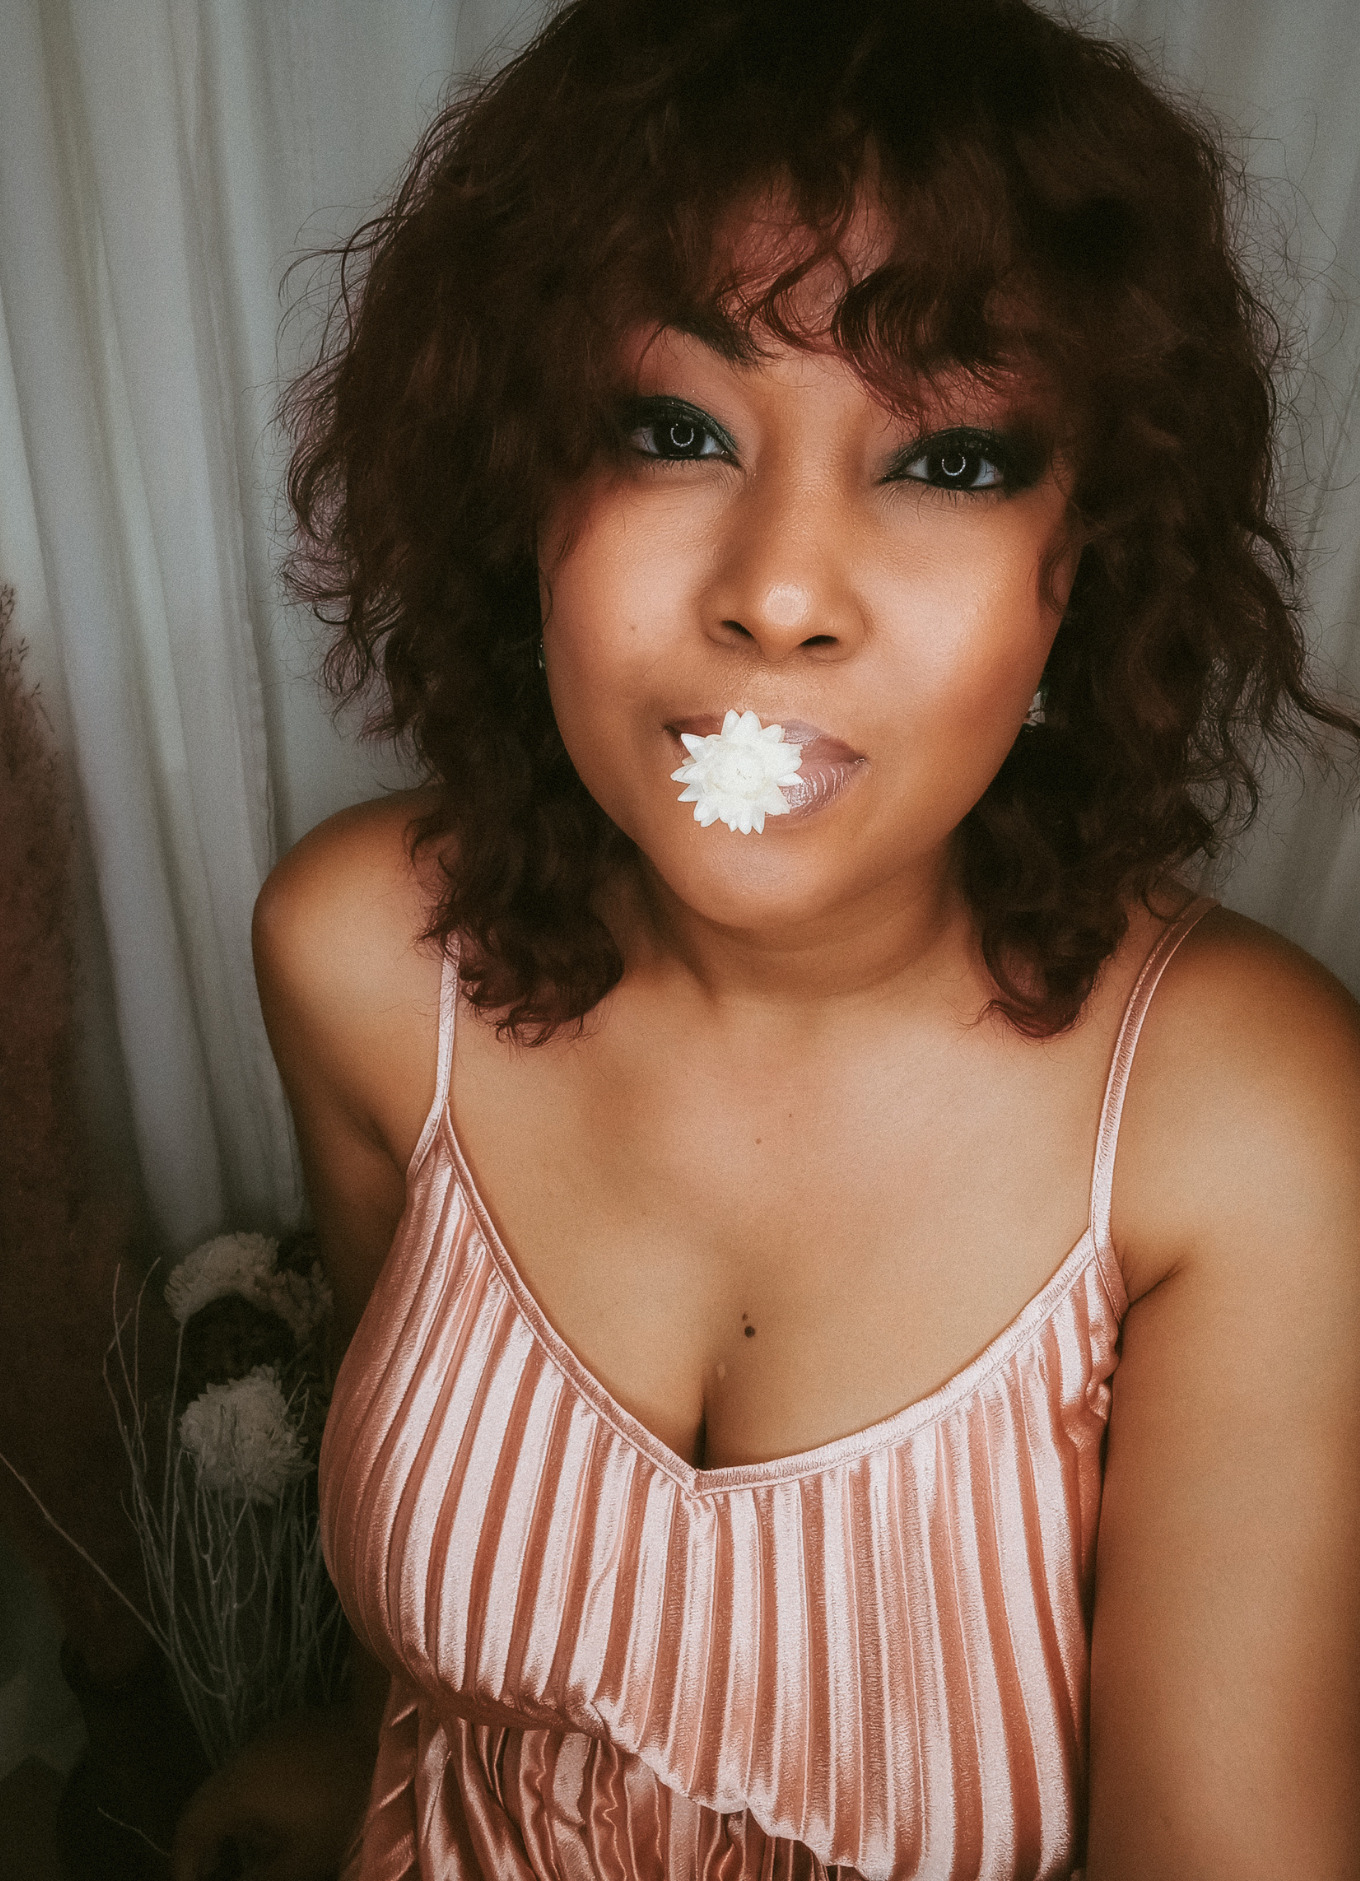 Bahamian blogger Rogan Smith poses in a satin dress with a flower in her mouth